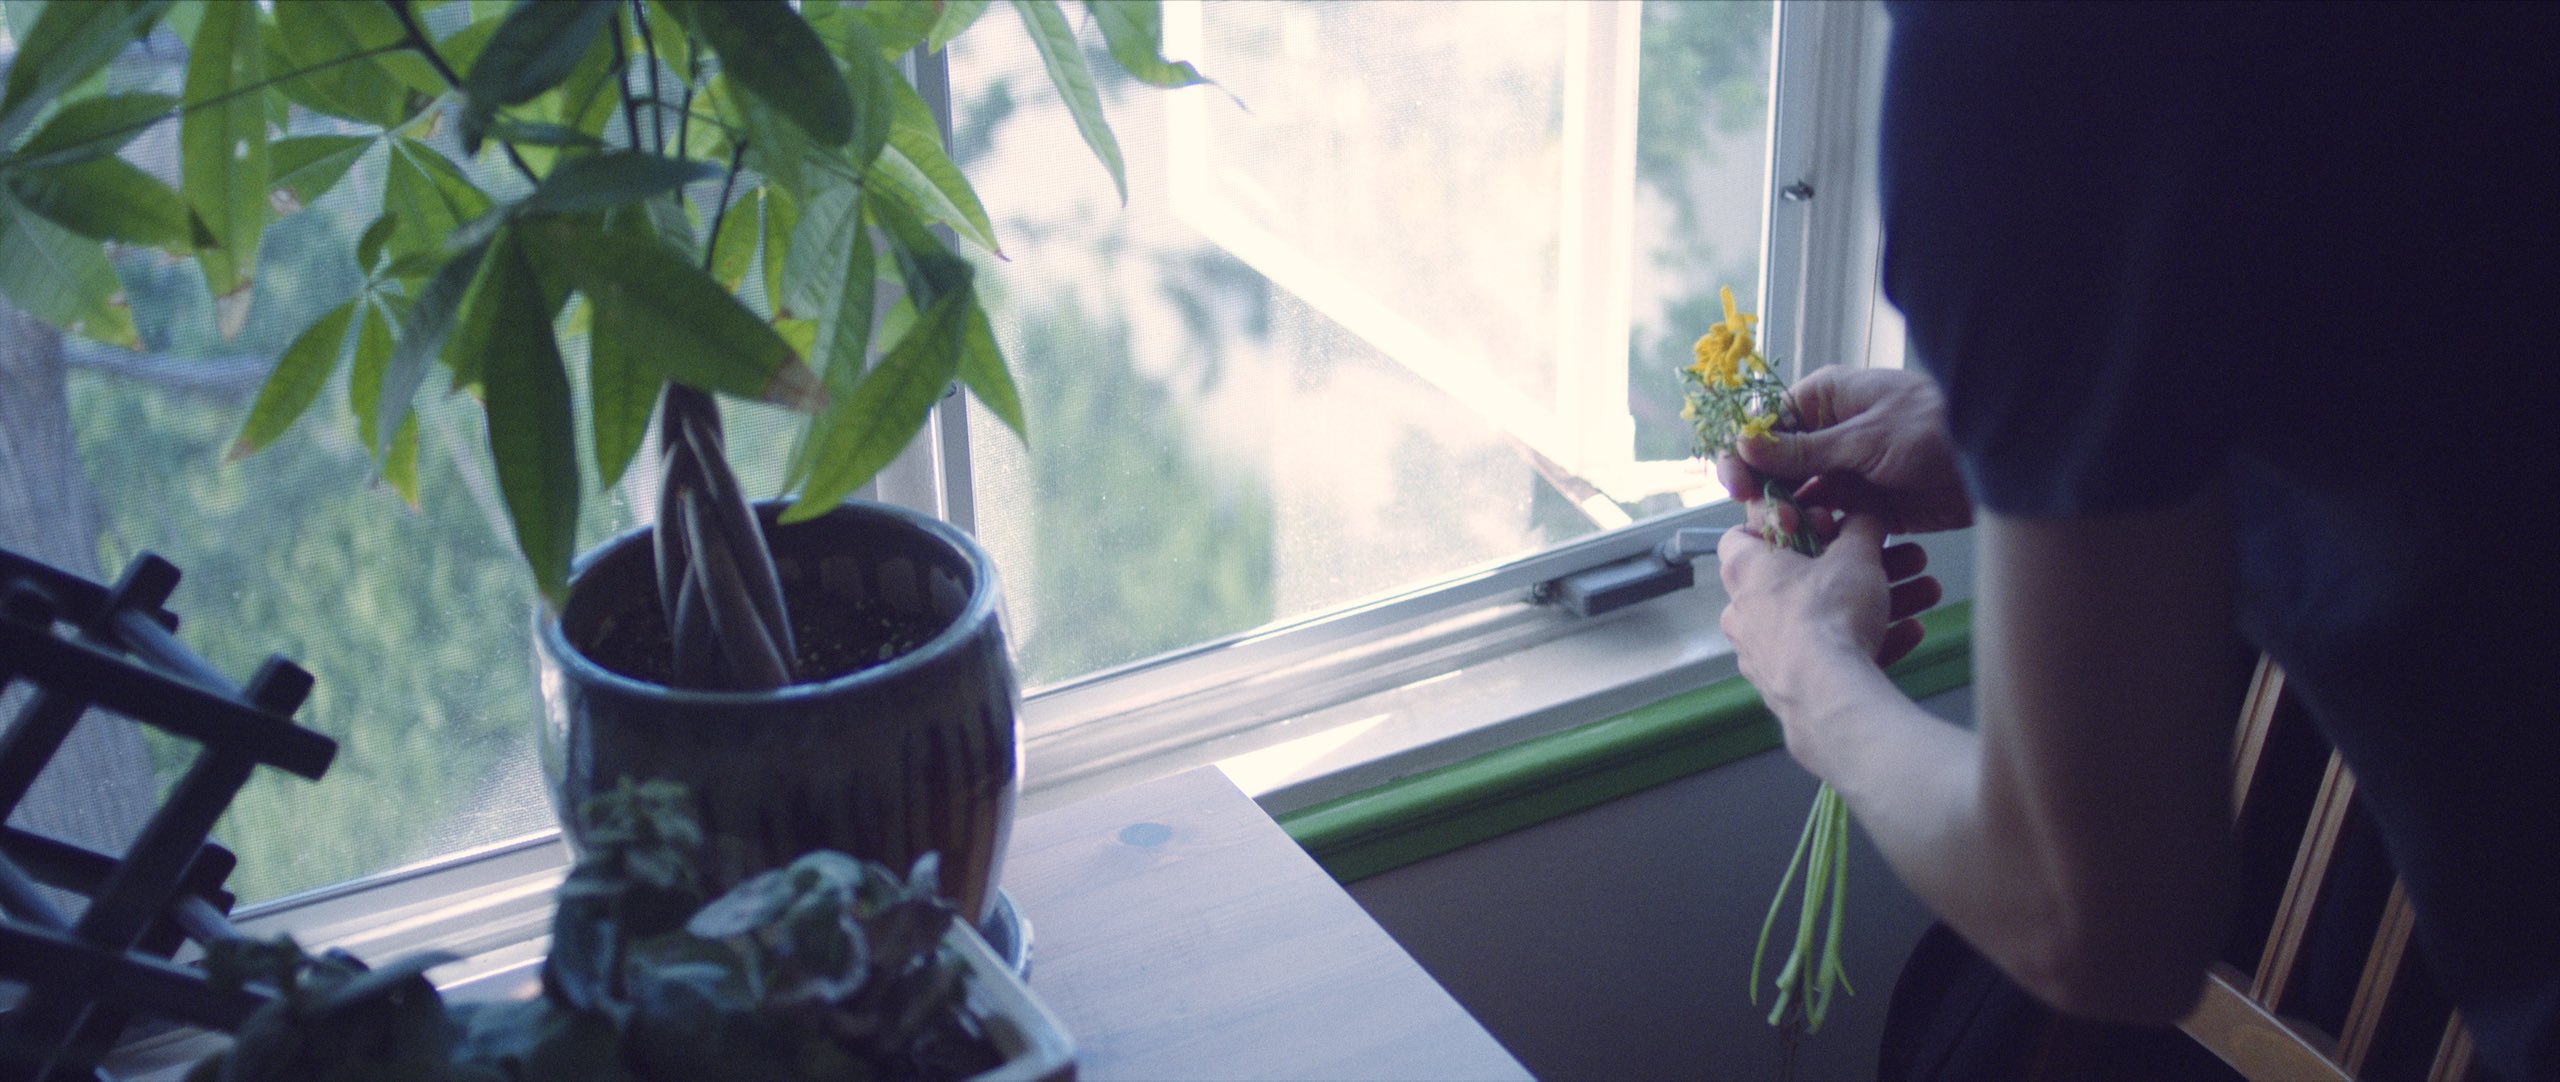 IU C&I Studios Portfolio Jellyfish Short Film Produced by C&I Studios Person holding yellow flowers by a window with plants nearby on a table